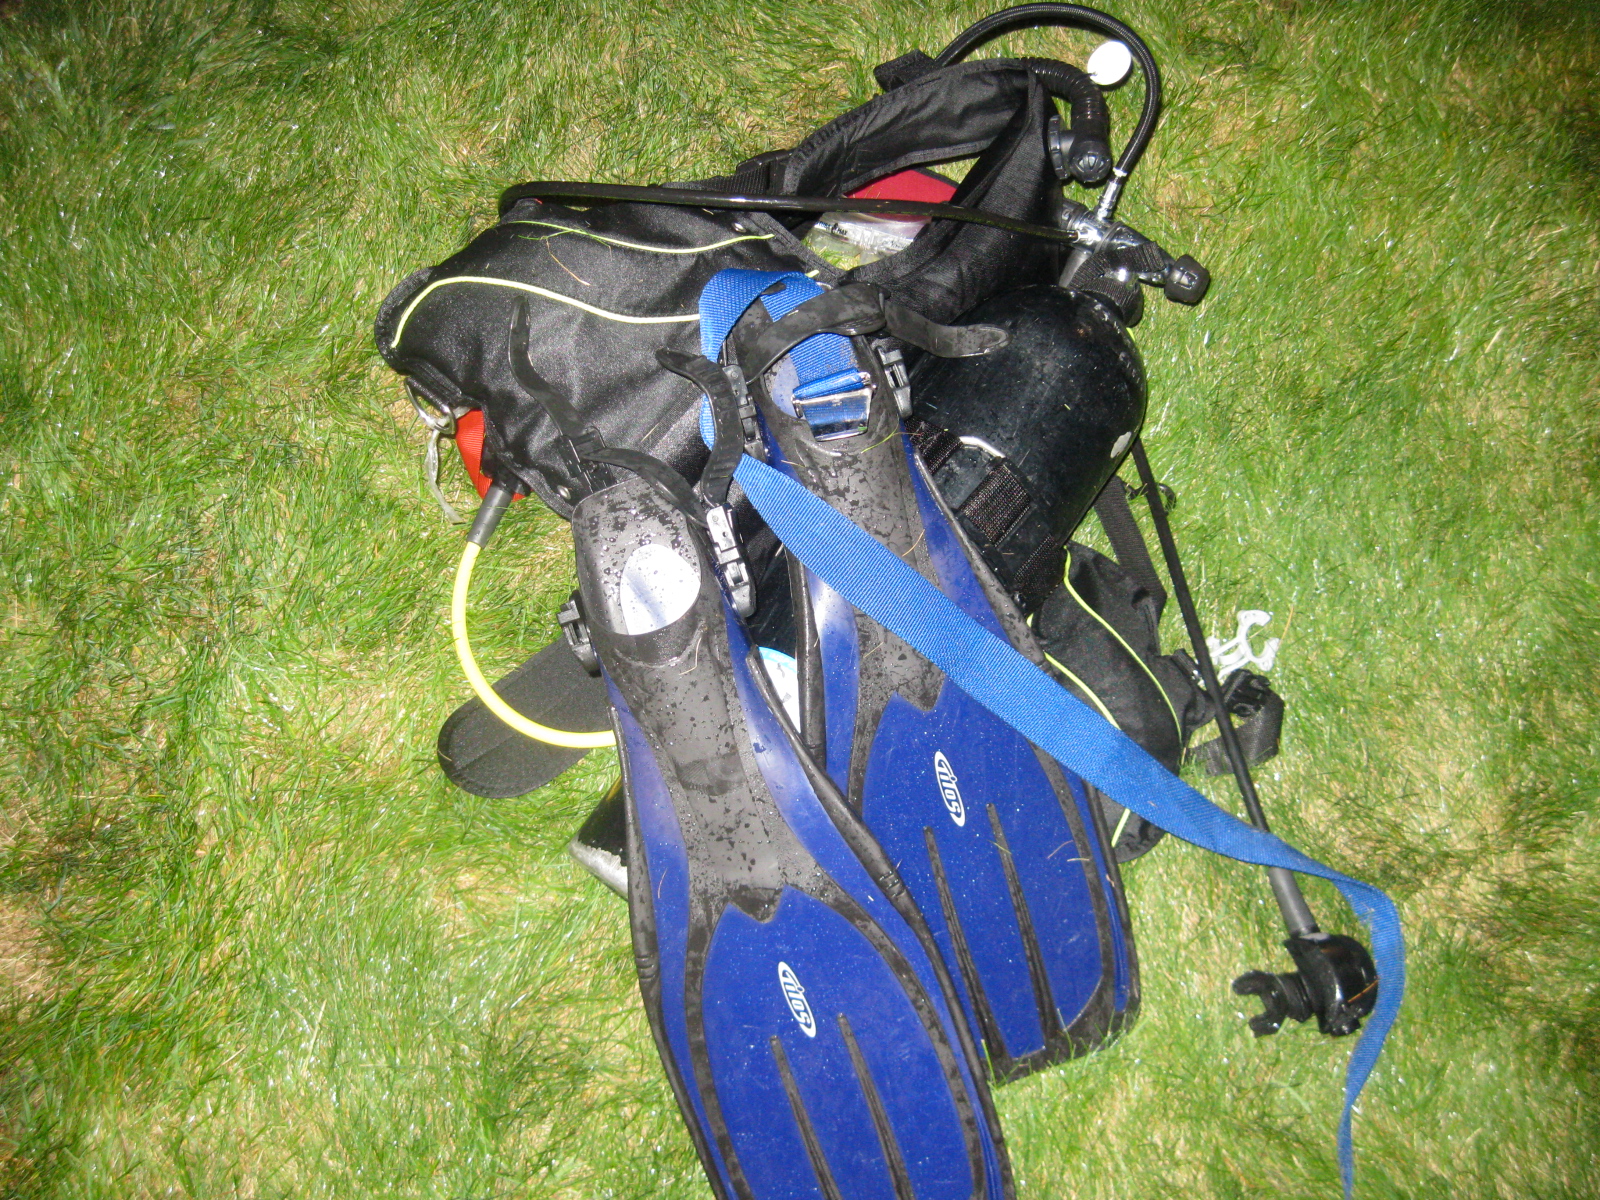 A Canadian man used this scuba gear to smuggle more than 8 pounds of marijuana into Michigan. (Credit: U.S. Border Patrol)